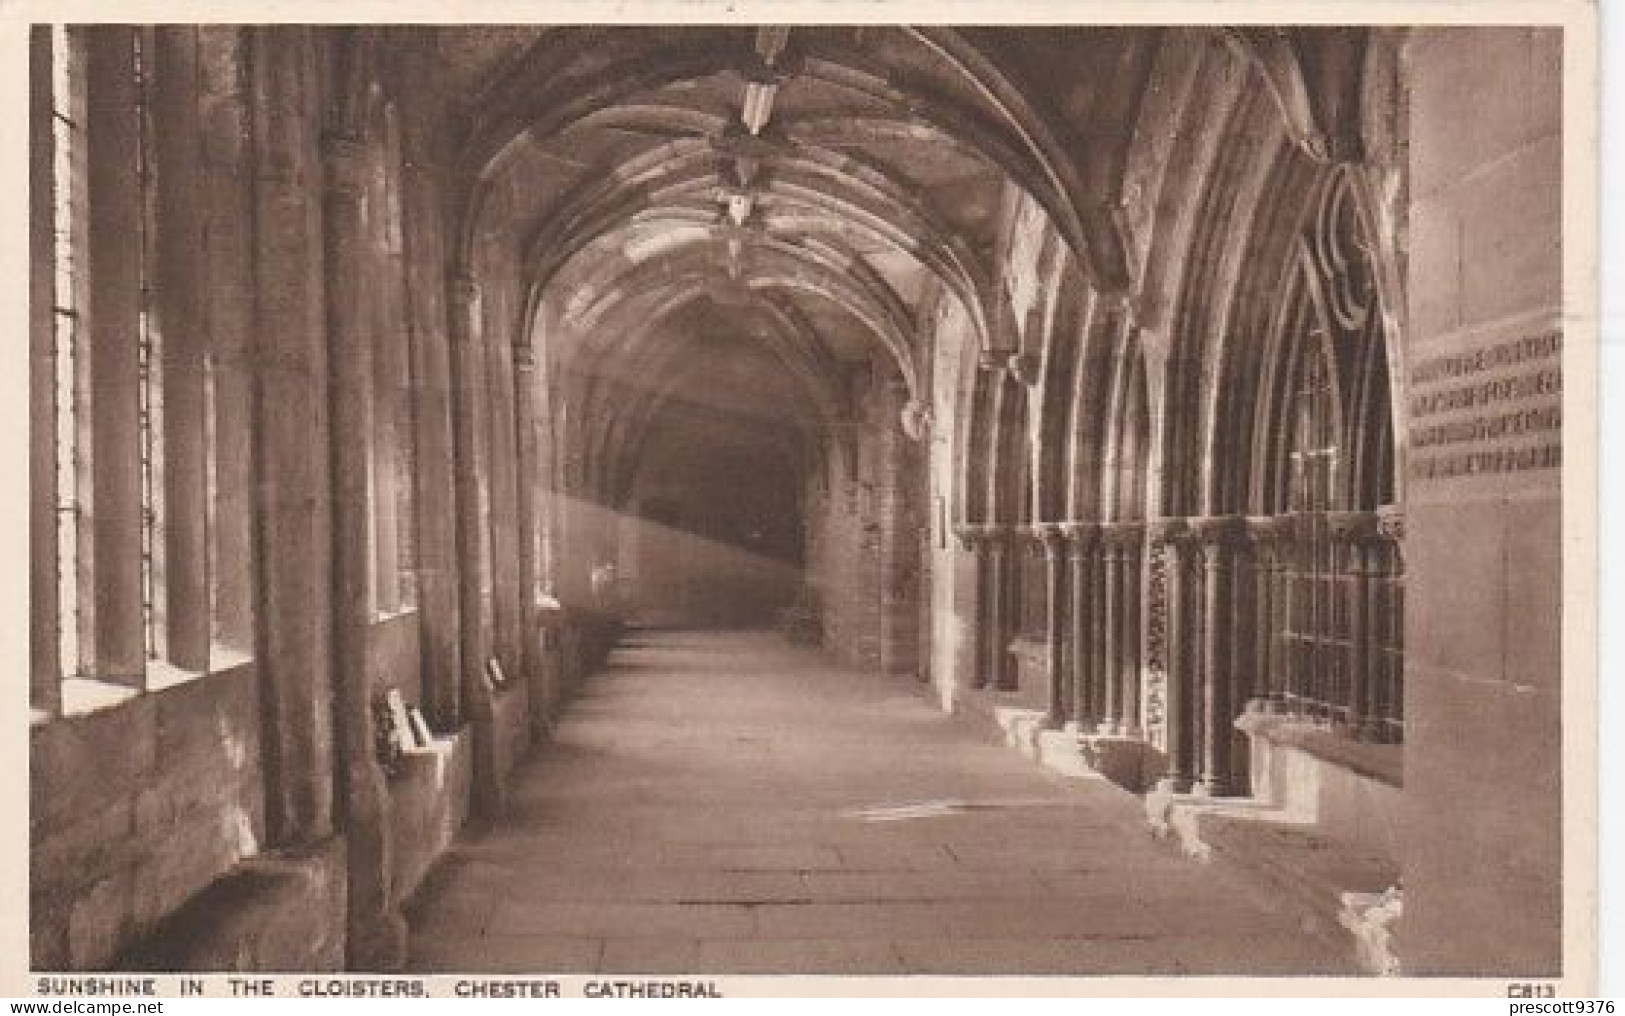 Sunshine In The Cloisters, Chester Cathedral  - Cheshire - Unused Postcard - Che1 - Chester